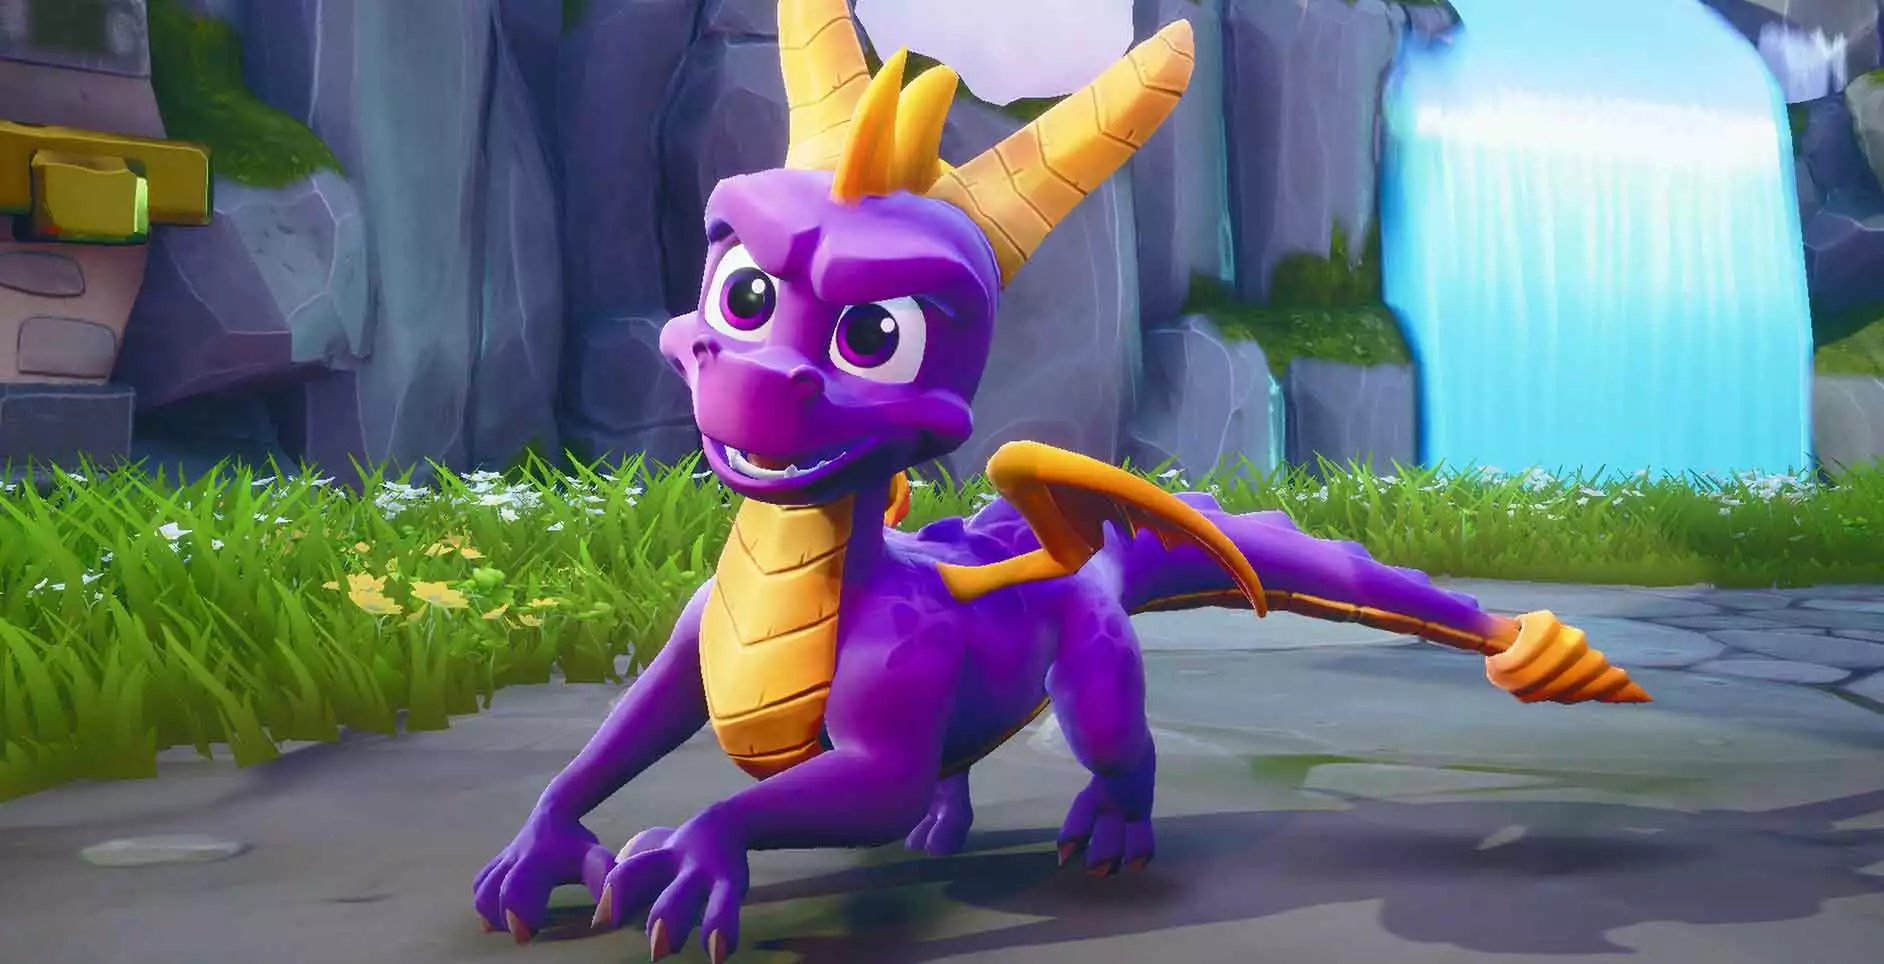 Spyro the Dragon 4 tease suggests he could spread his wings in 2024